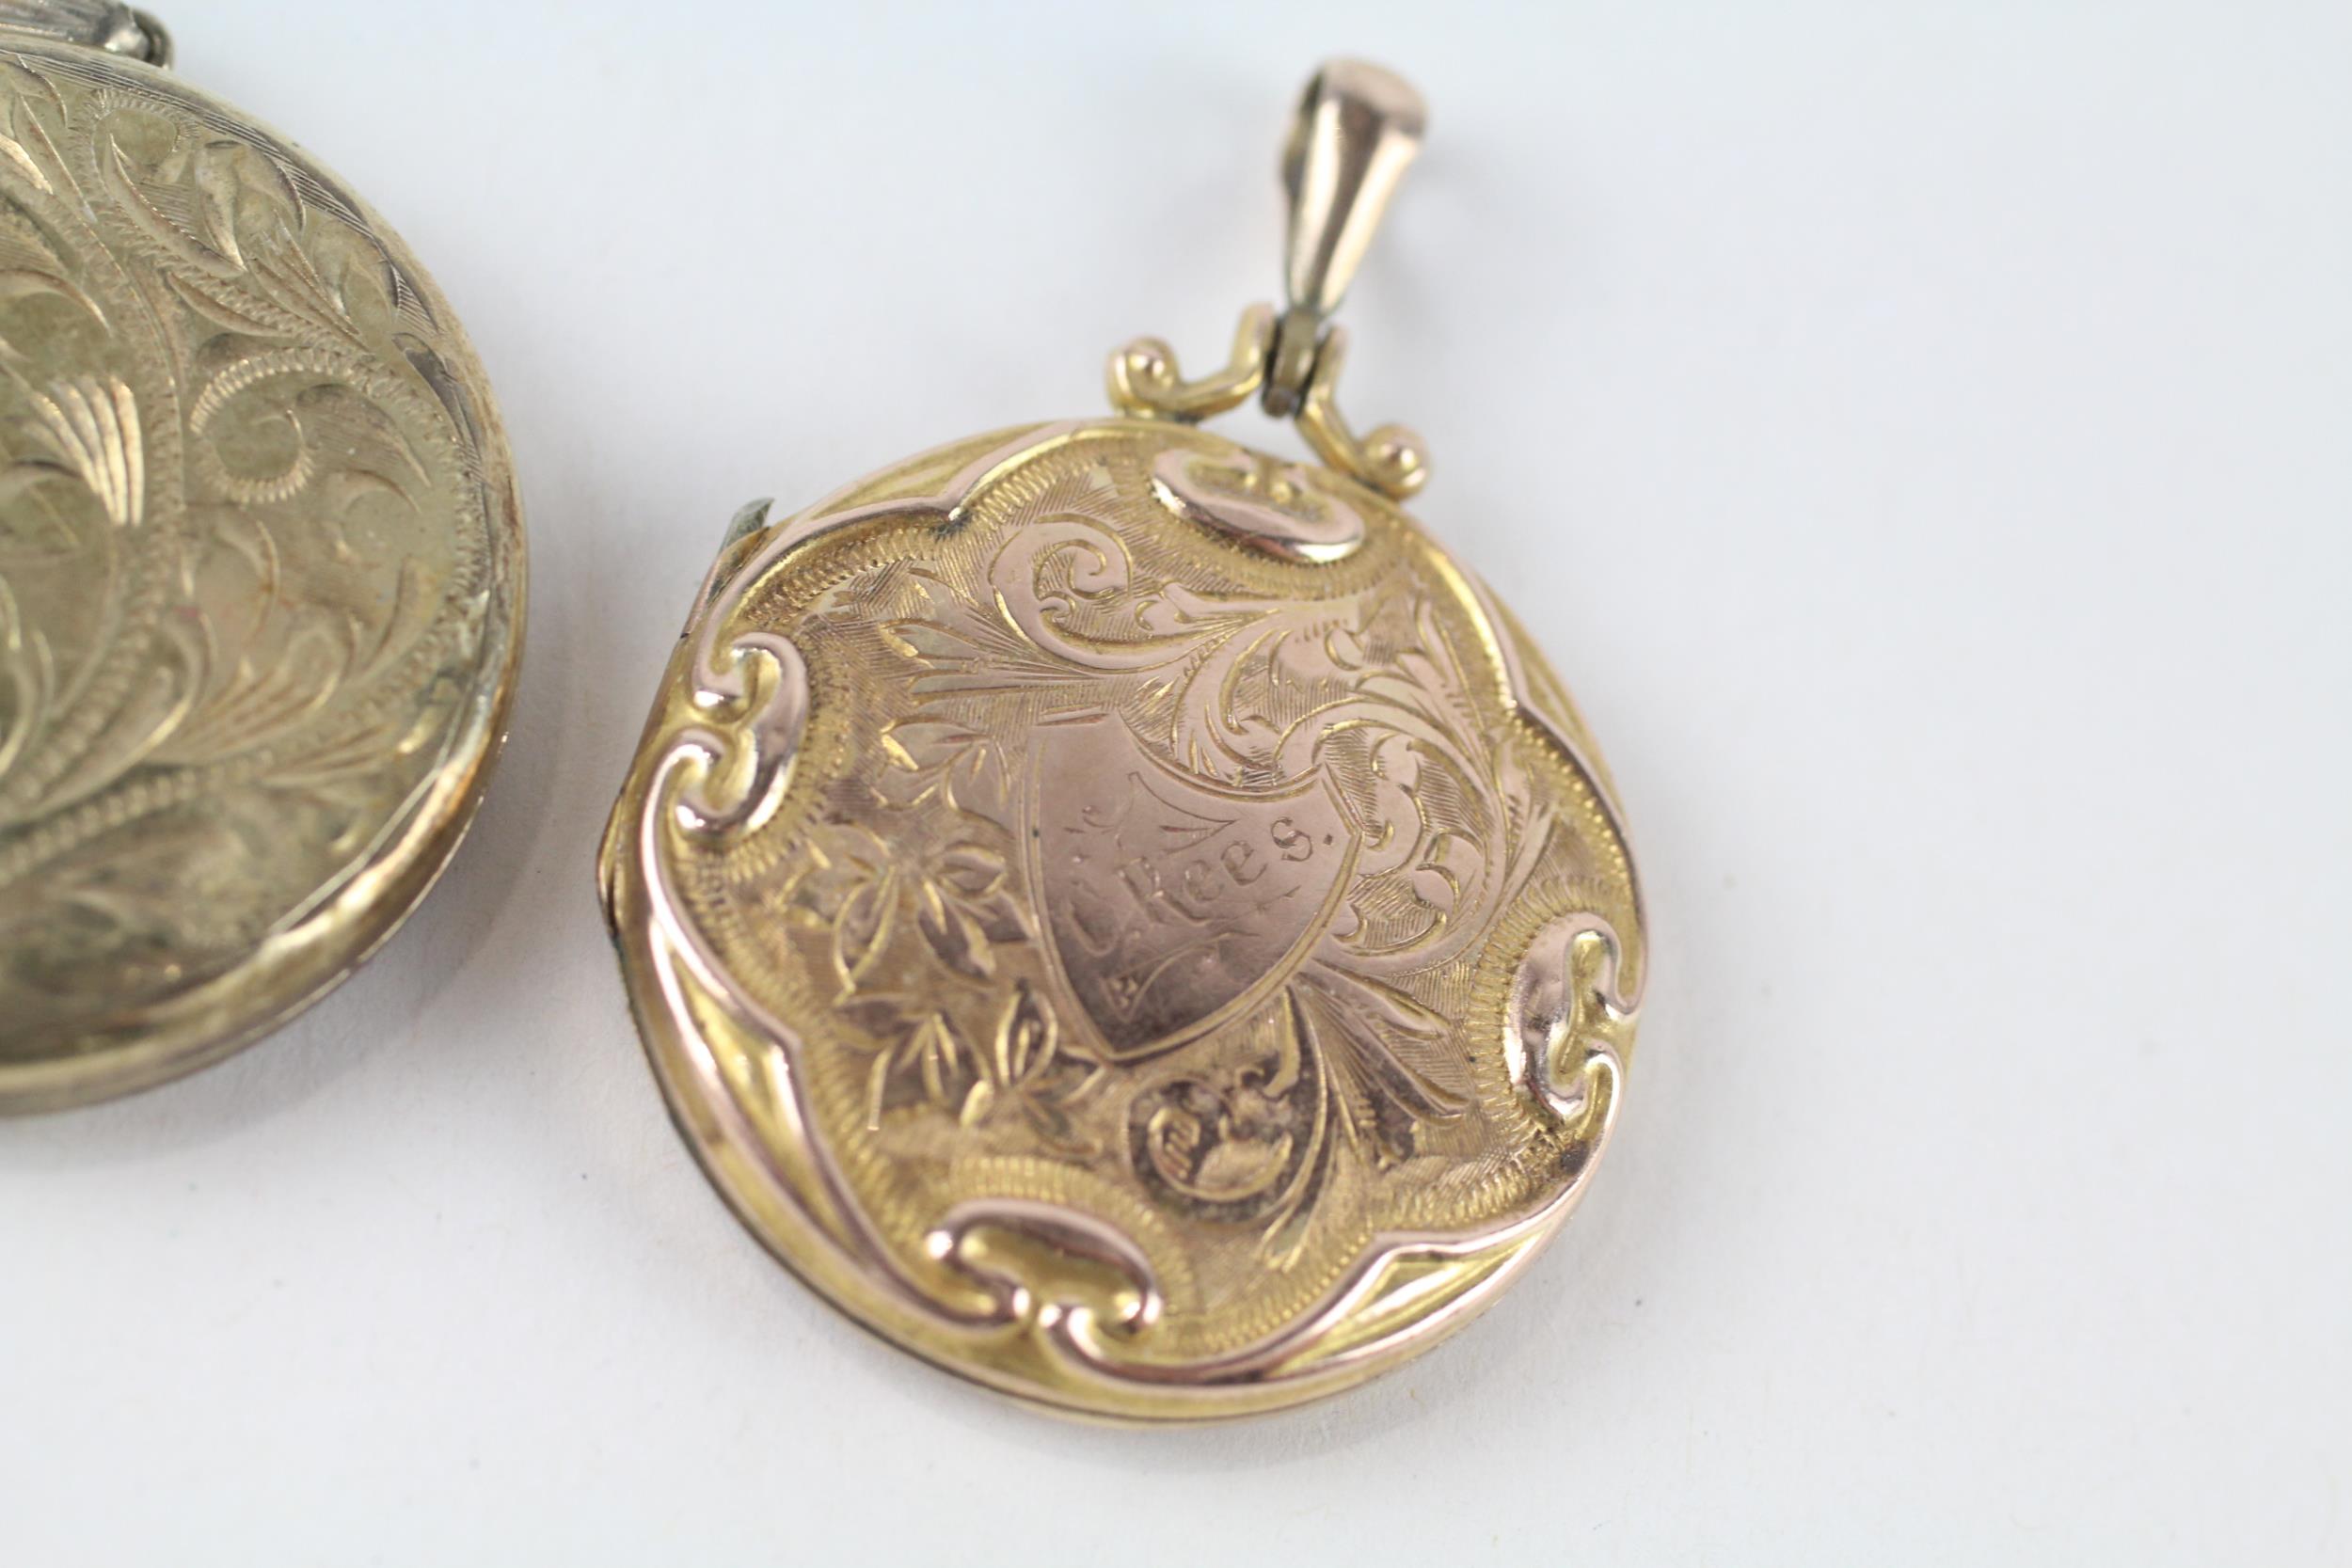 3x 9ct gold back & front antique patterned lockets (24.1g) - Image 4 of 5